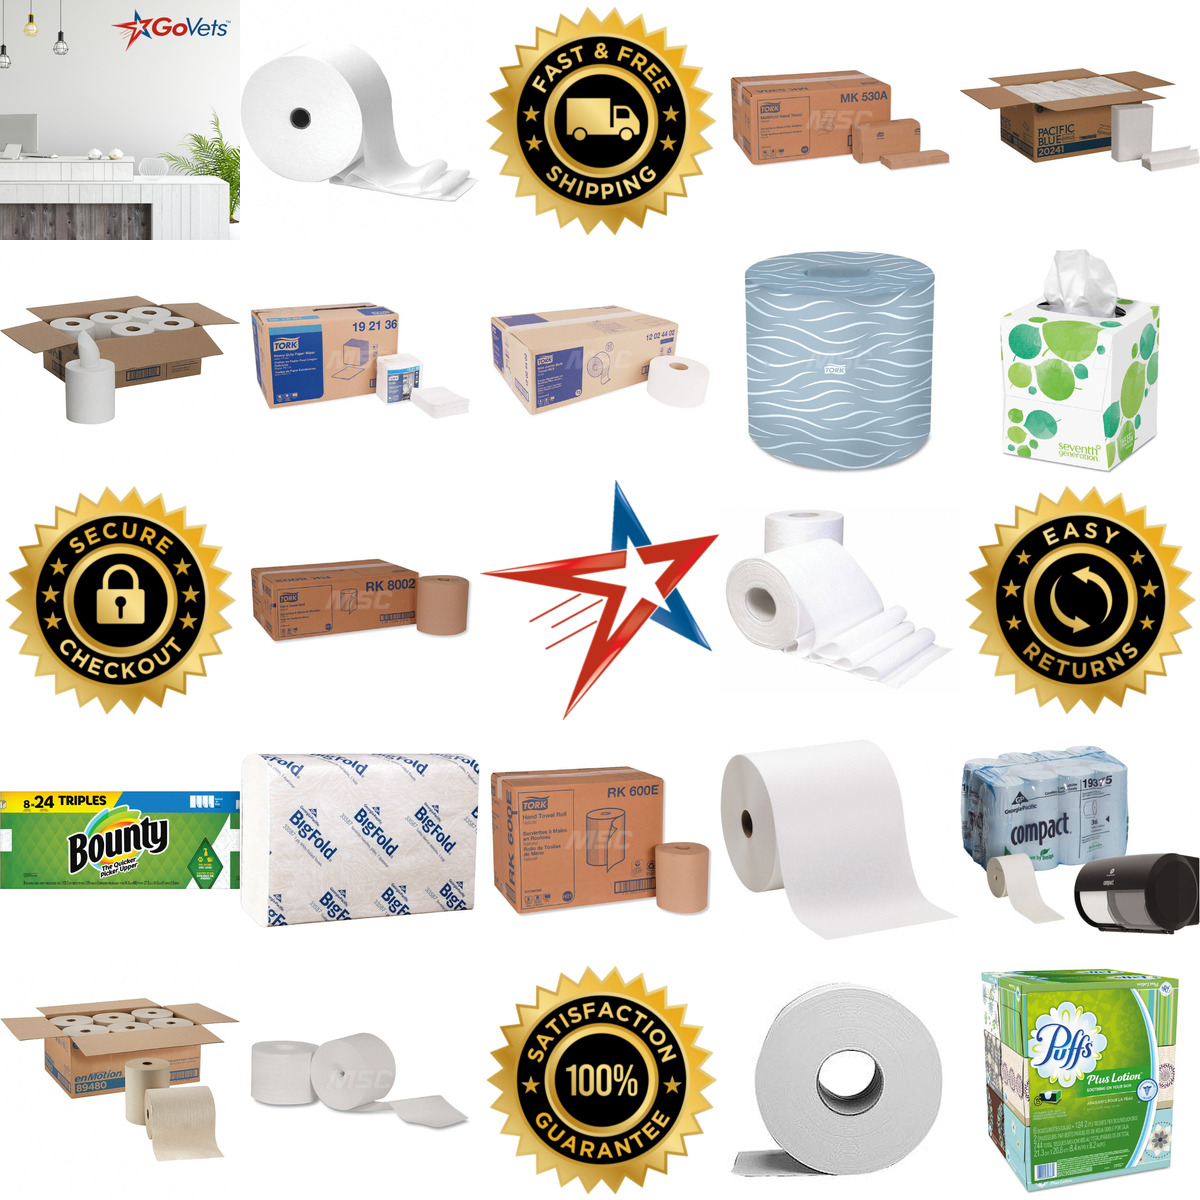 A selection of Paper Towels Tissue and Toilet Seat Covers products on GoVets